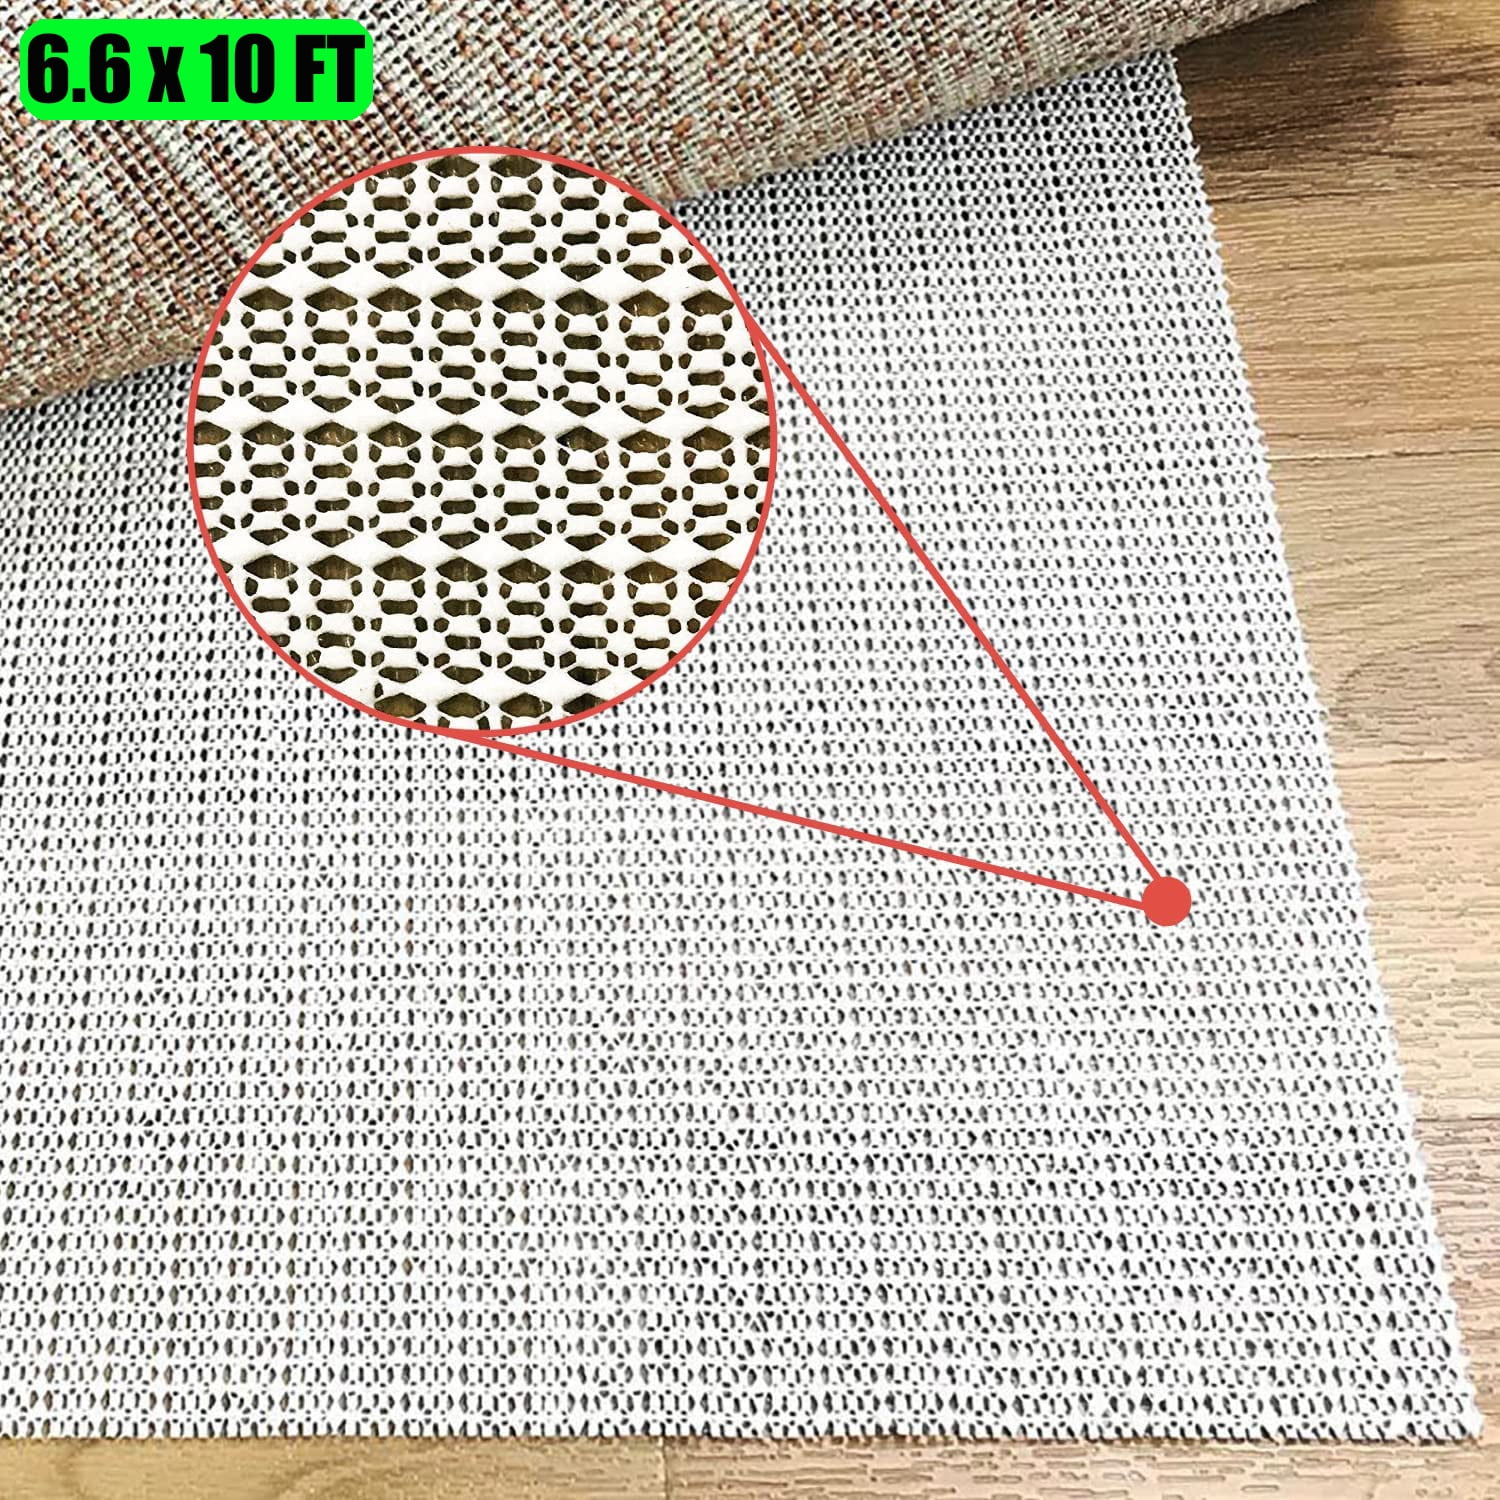 Slip-Stop Super Grip Natural Cushioned Non-Slip Rug Pad for Area Rugs and  Runner Rugs, Rug Gripper for Hardwood Floors 2 x 3 ft